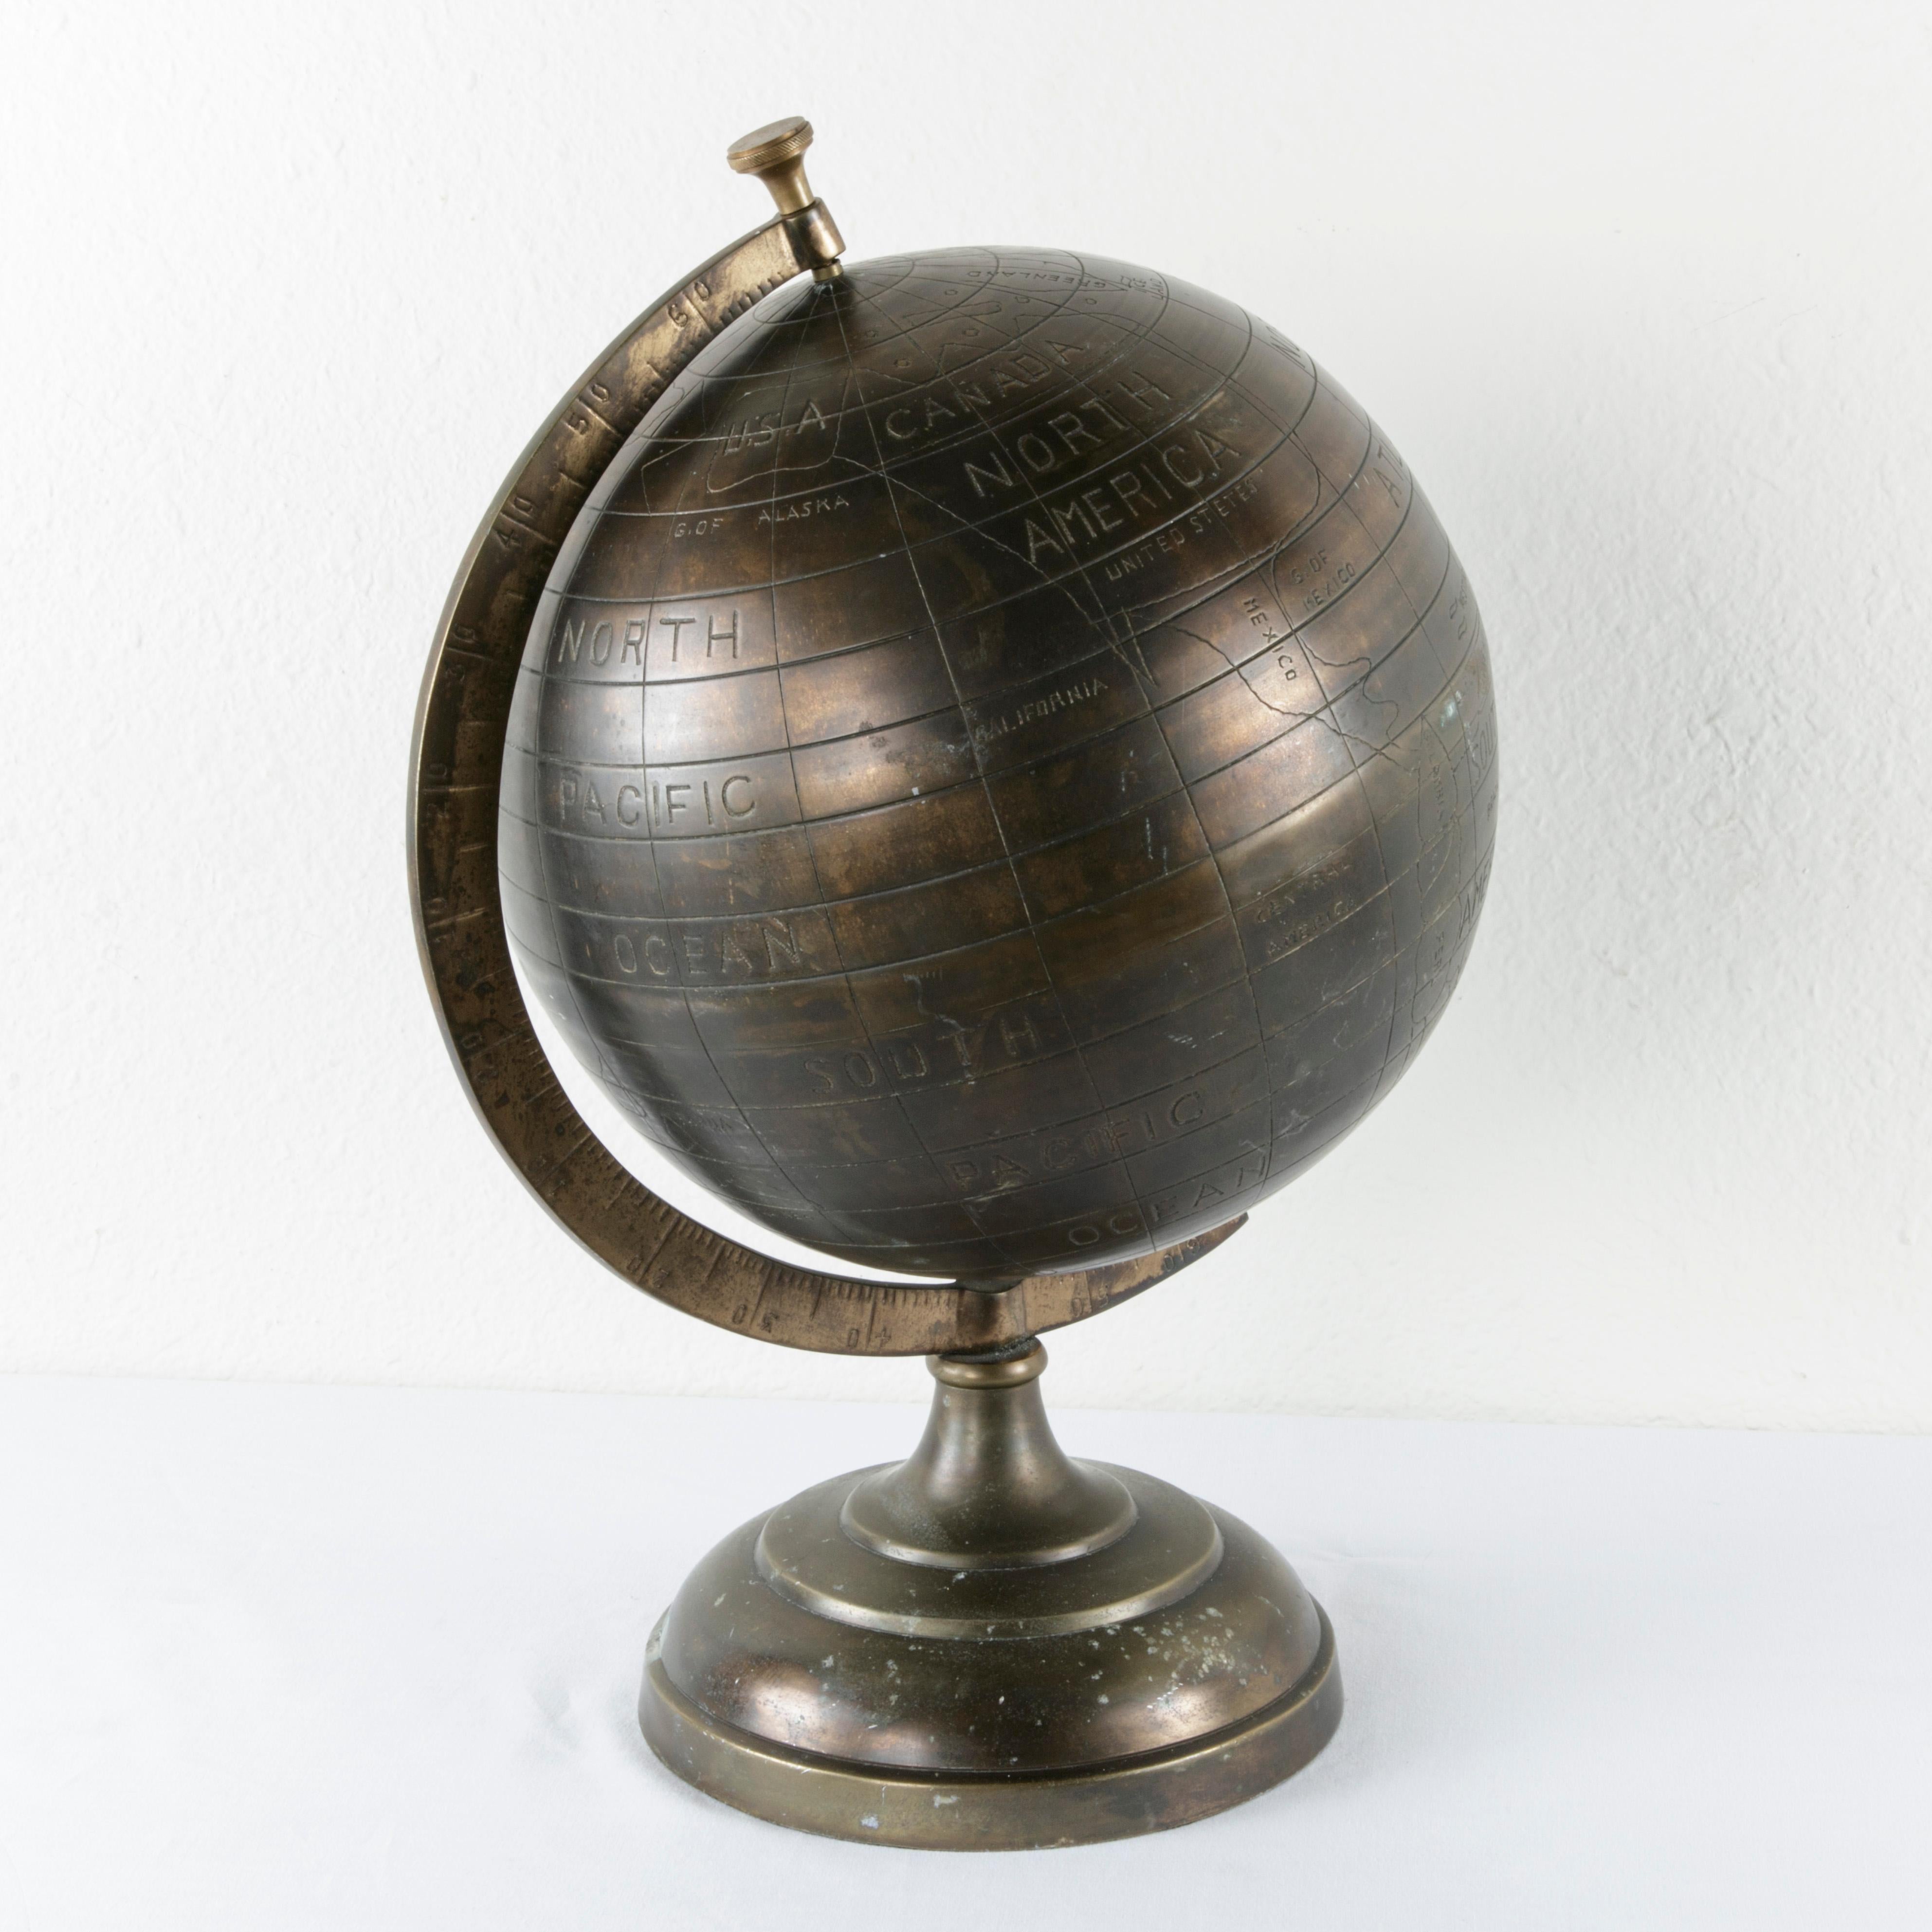 British 20th Century Stylized Etched Bronze Globe on Axis Labeled in English